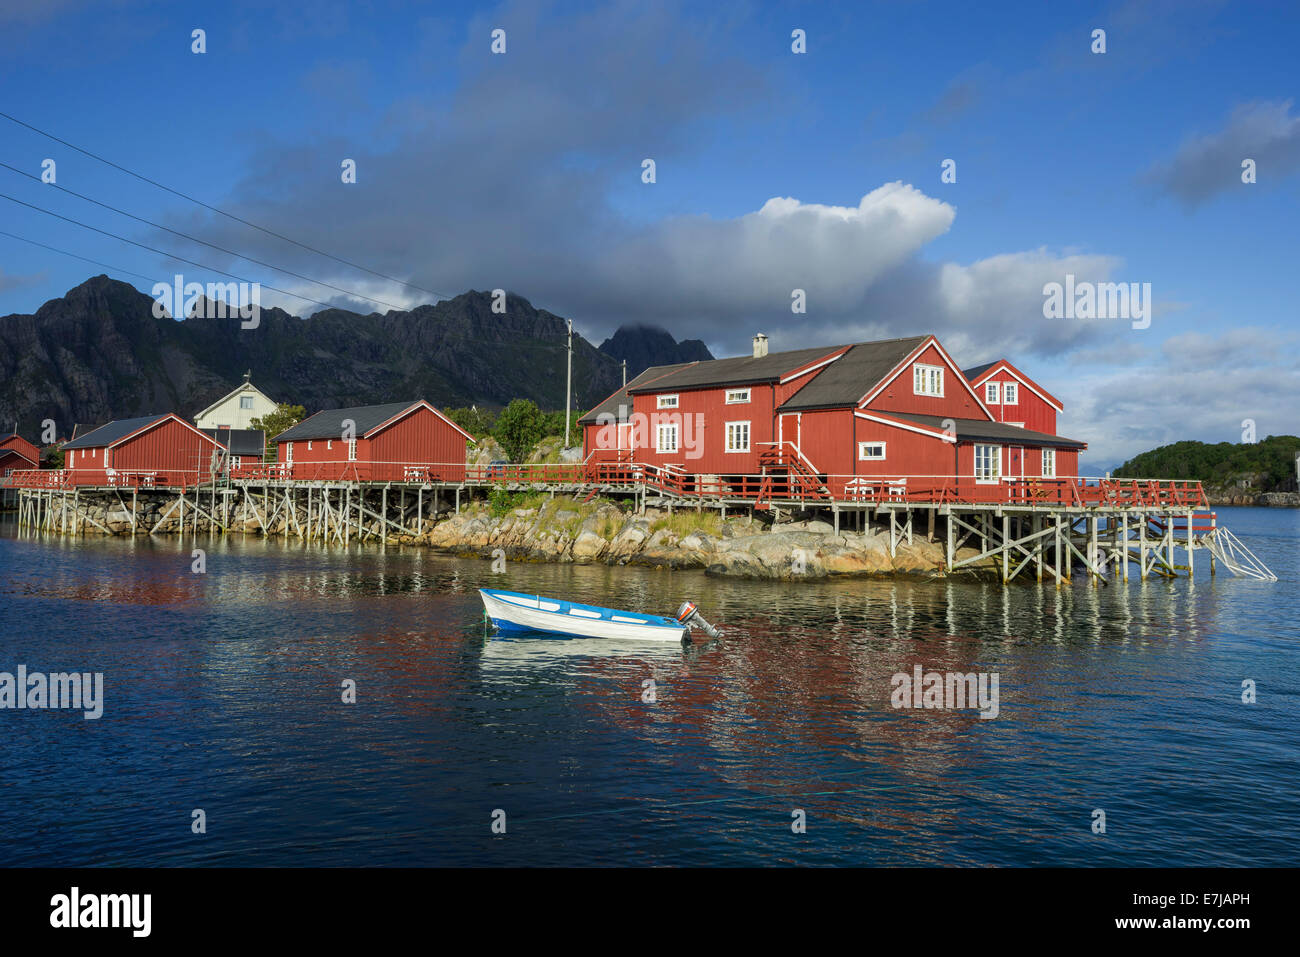 Rorbuer fishermen's cabins with a small motor boat, Henningsvær, Lofoten, Nordland, Norway Stock Photo